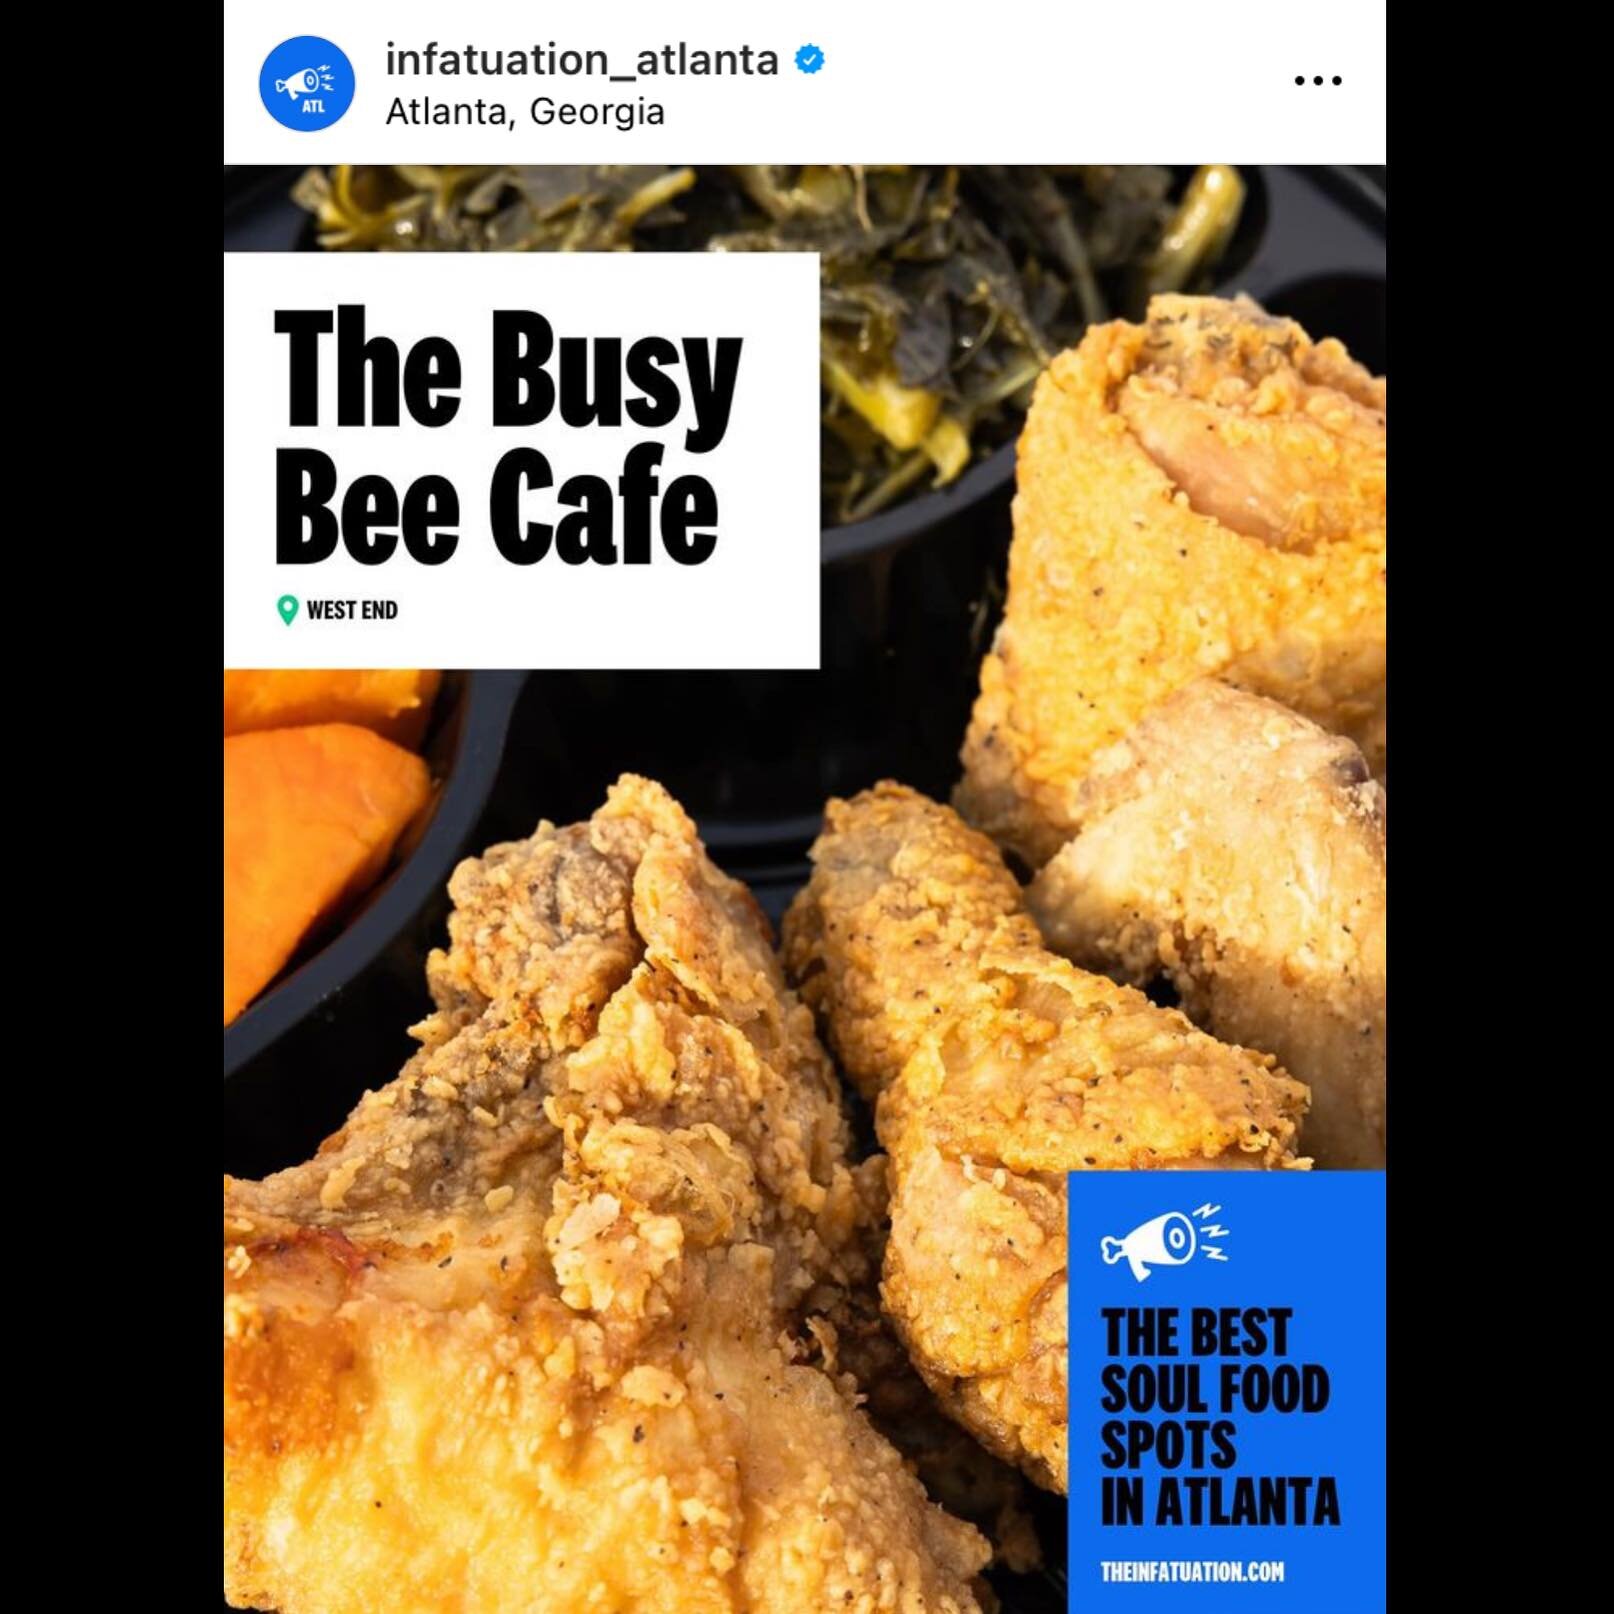 Thank You To @infatuation_atlanta For Including Us in Their Feature of The BEST Soul Food Spots in #ATL! We Are So Excited To BEE Mentioned. 💛🐝 Order Now at TheBusyBeeCafe.com
.
.
.
.
.
.
#ATL #Atlanta #SoulFood #AtlantaRestaurant #AtlantaEats #Foo